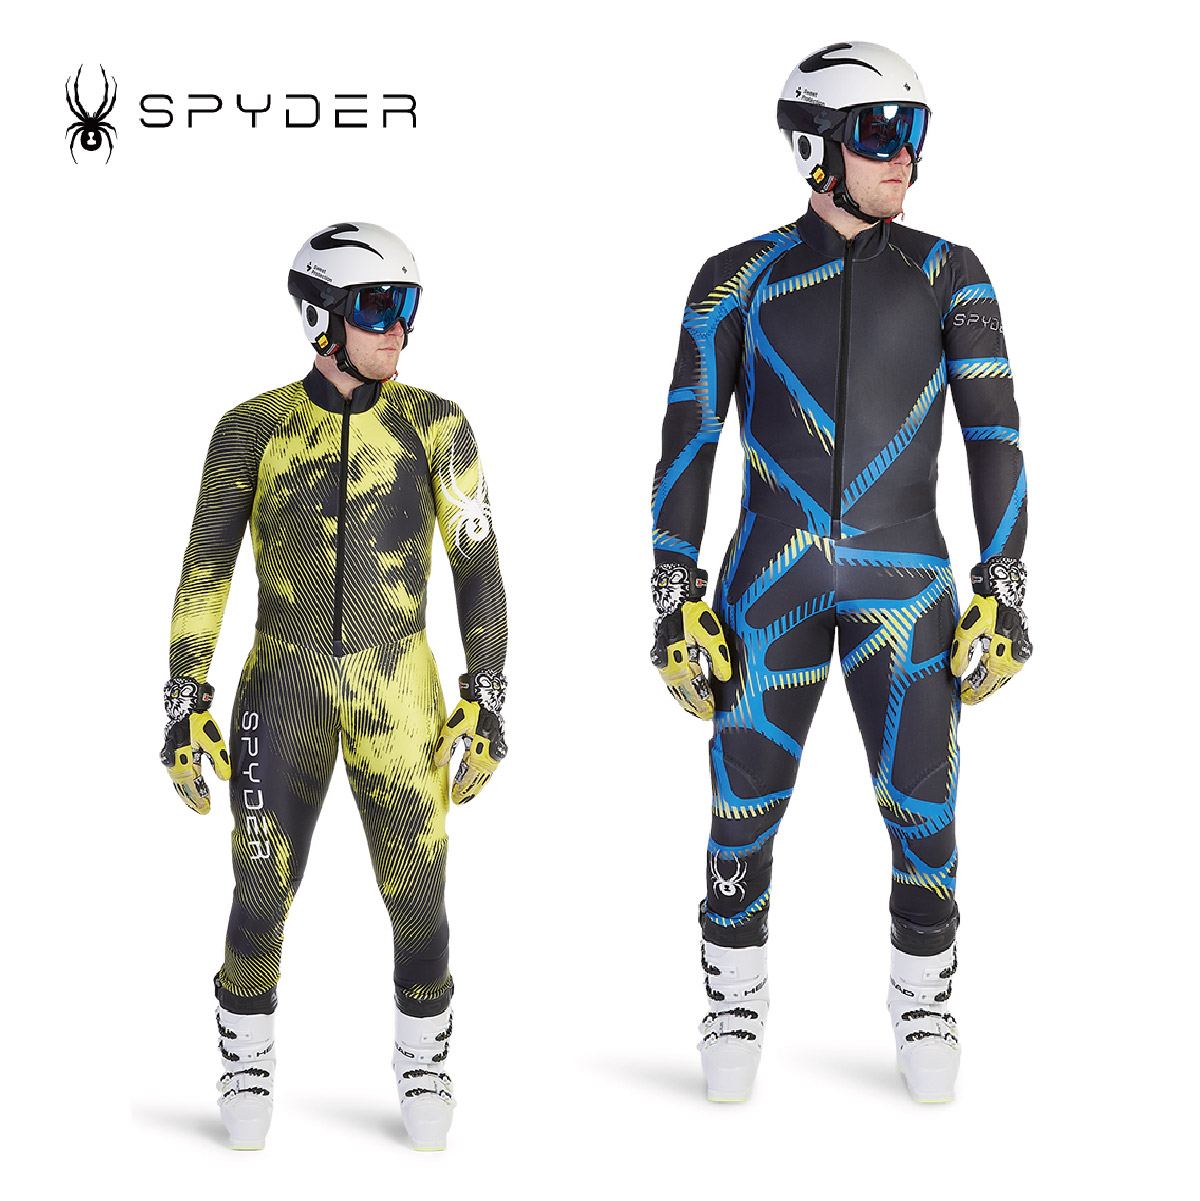 Share more than 189 spyder speed suit best